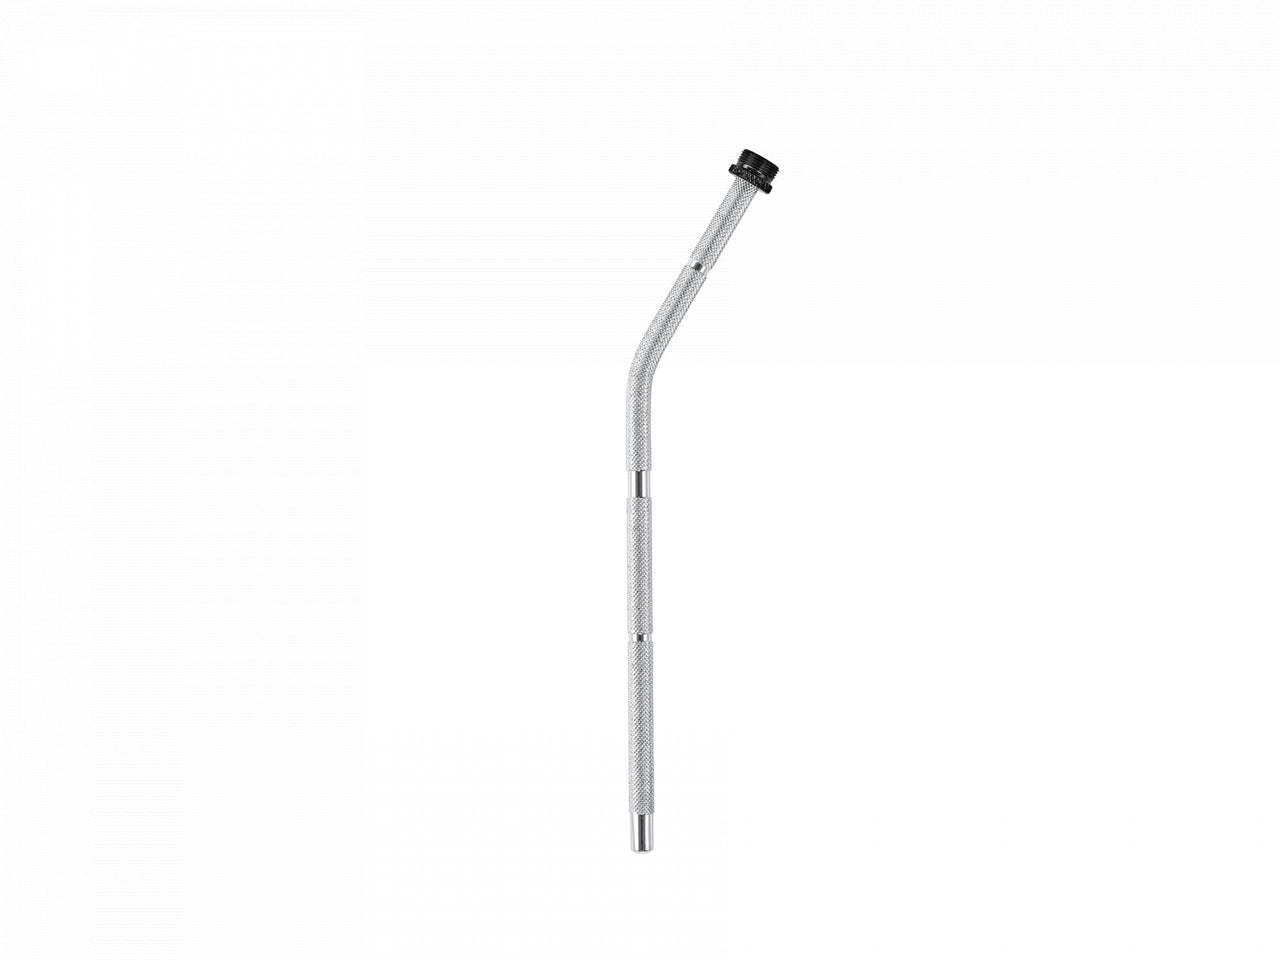 MEINL Percussion rod with threaded microphone connector, angled rod (MC-MR2) parts Meinl 